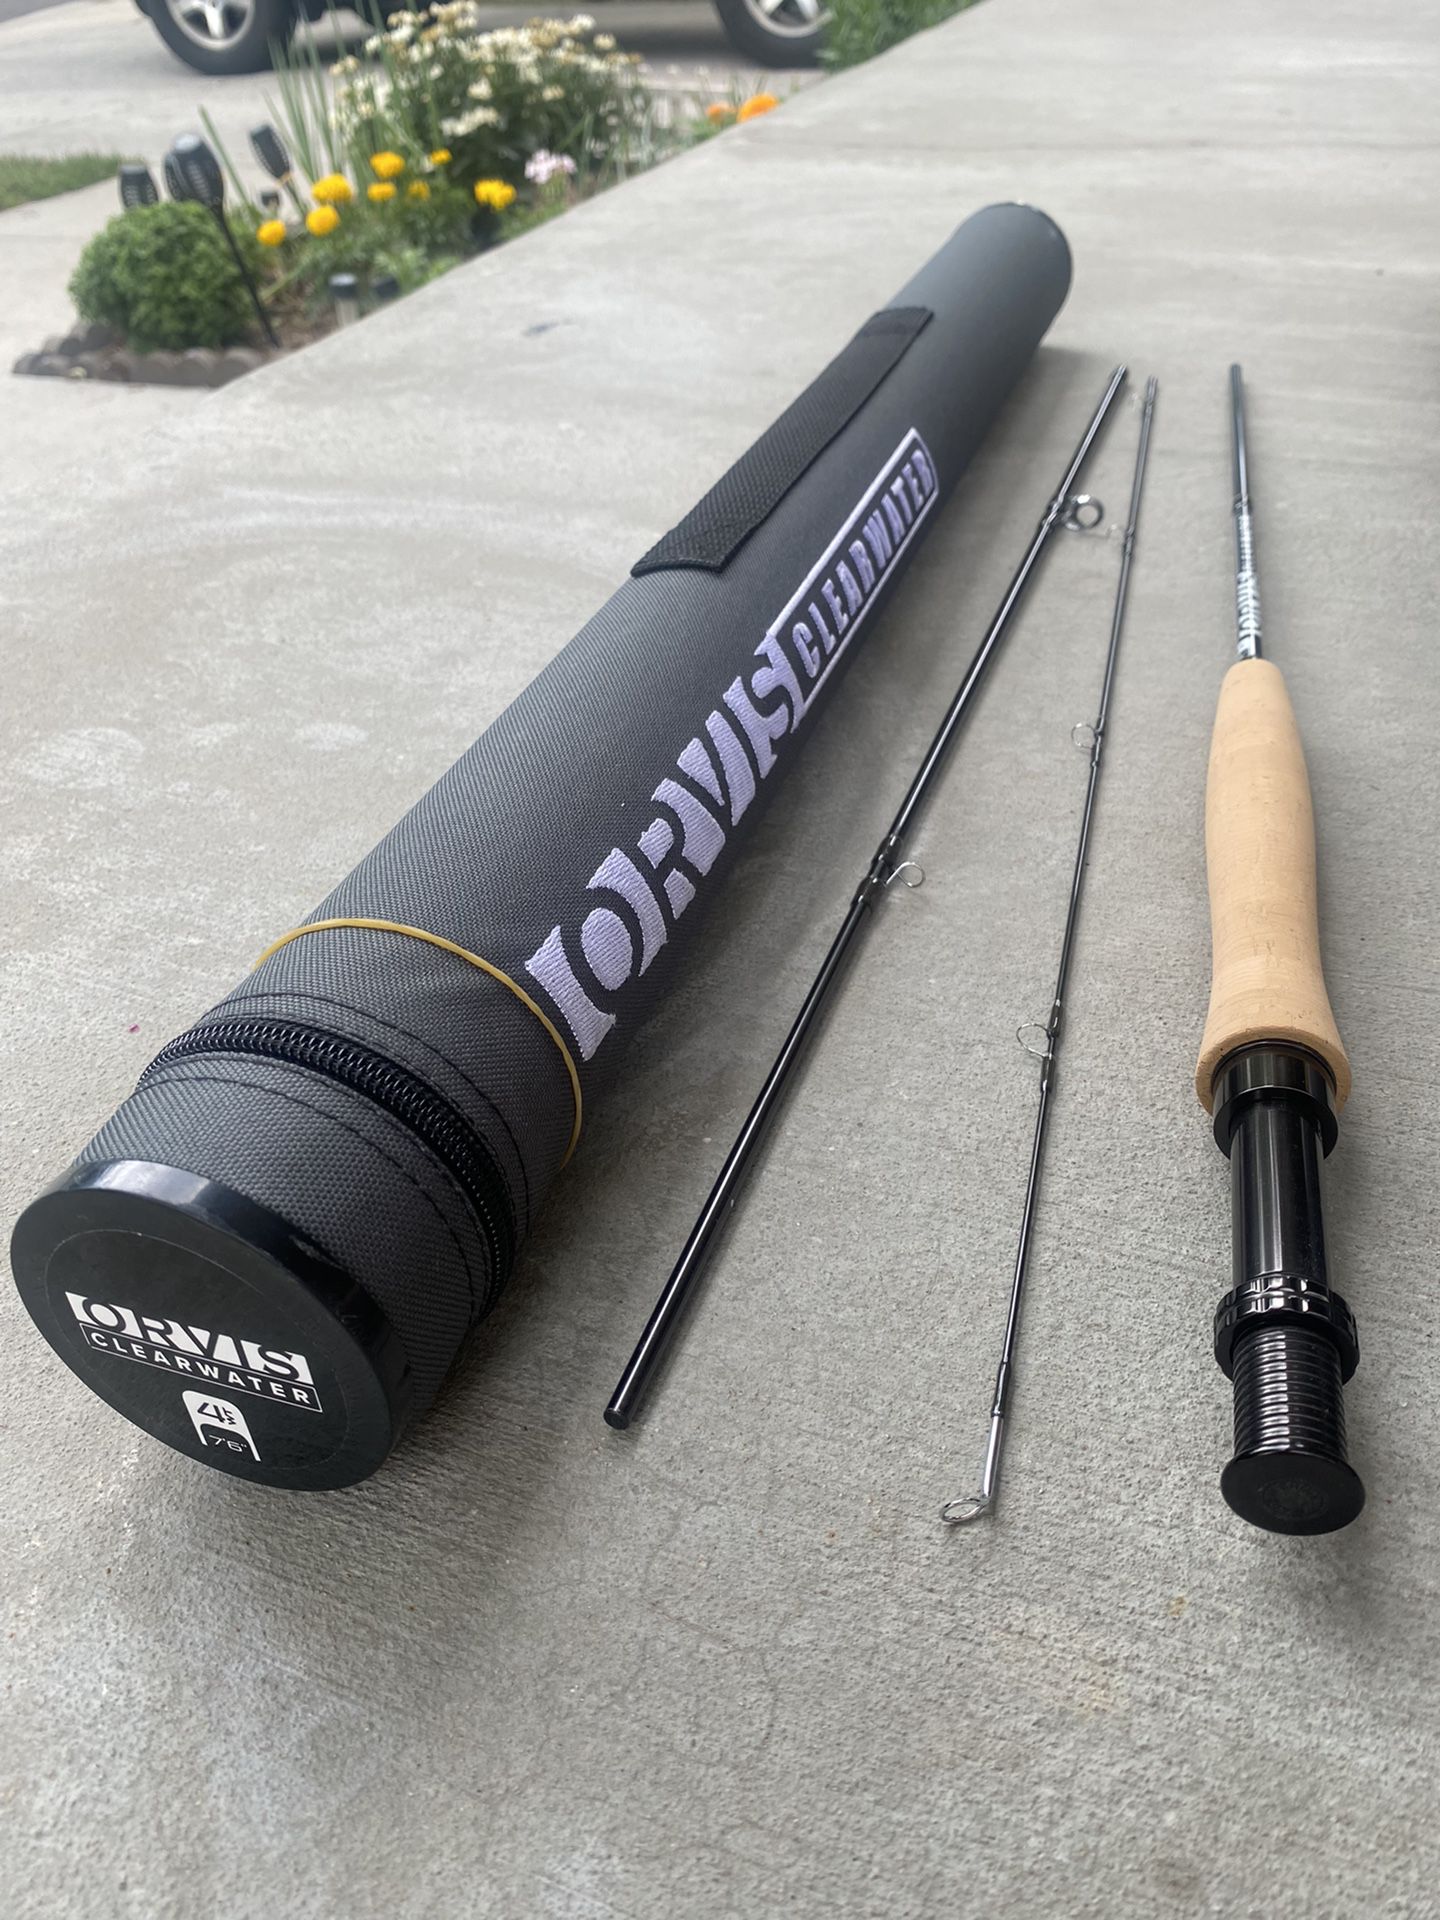  Brand new Orvis Clearwater 7' 6" 4wt fly fishing rod 2 available $200/each